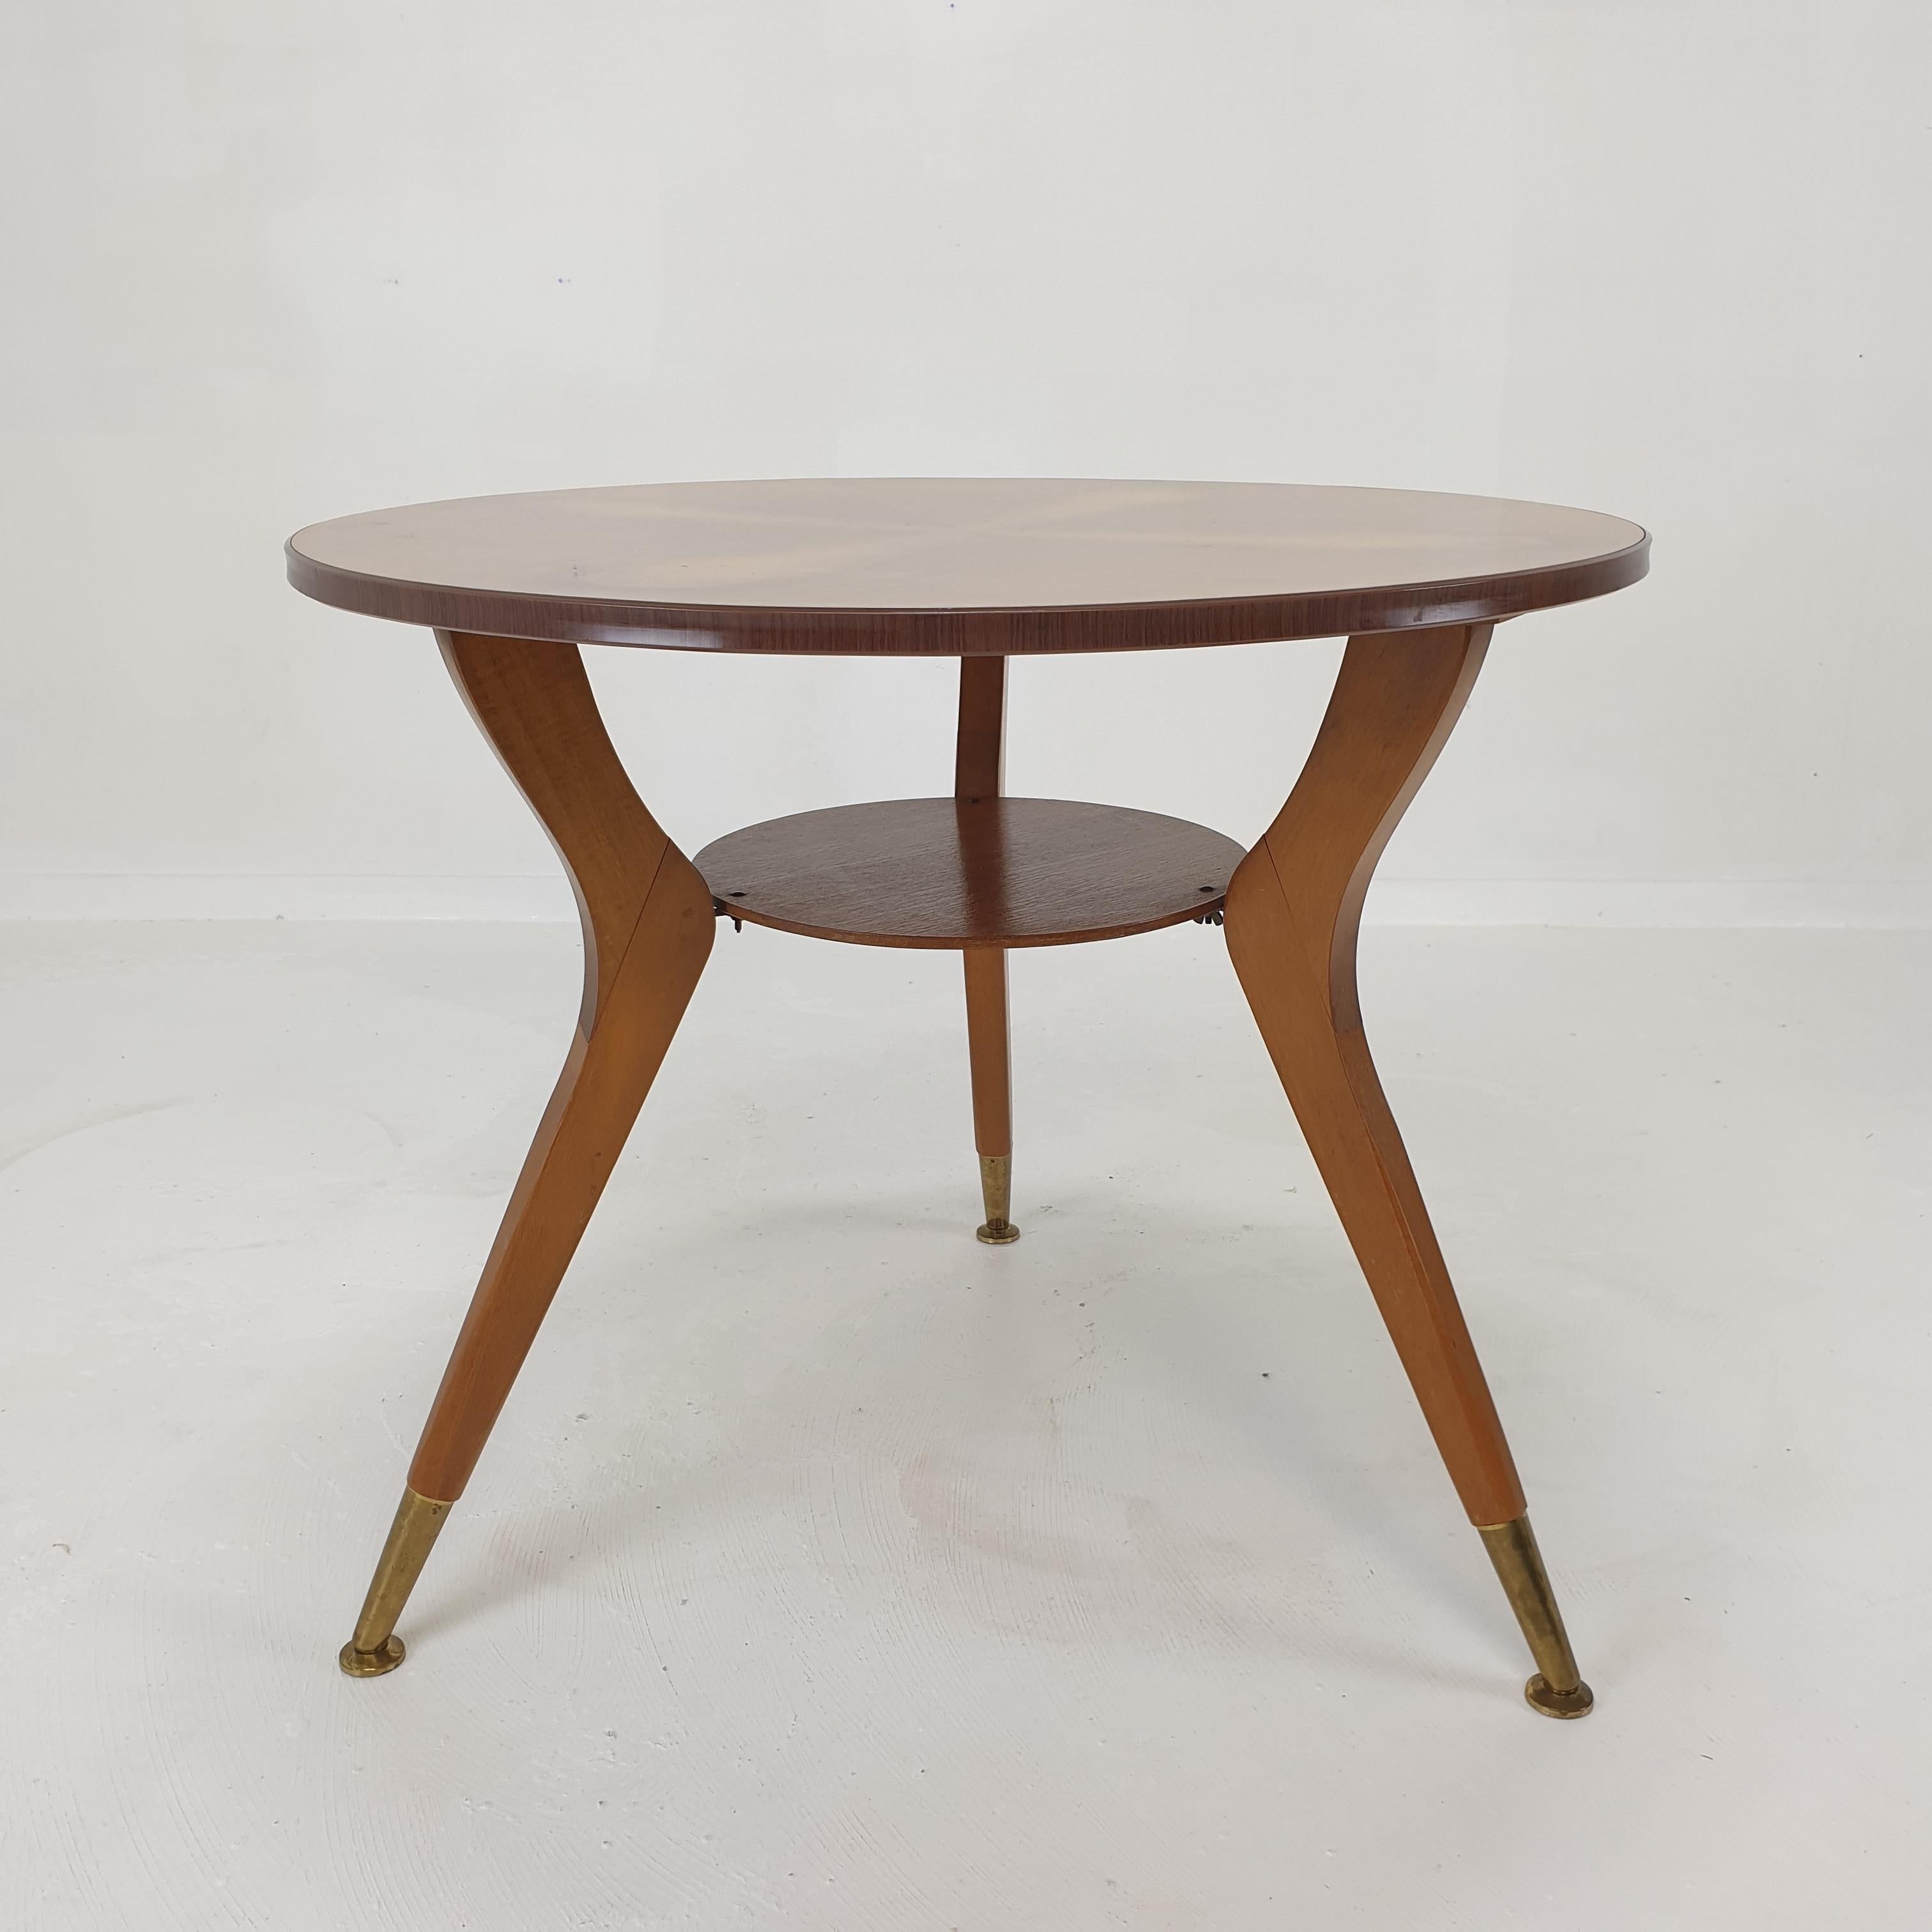 Midcentury Italian Wooden Coffee or Side Table with Brass Feet, 1960s For Sale 2